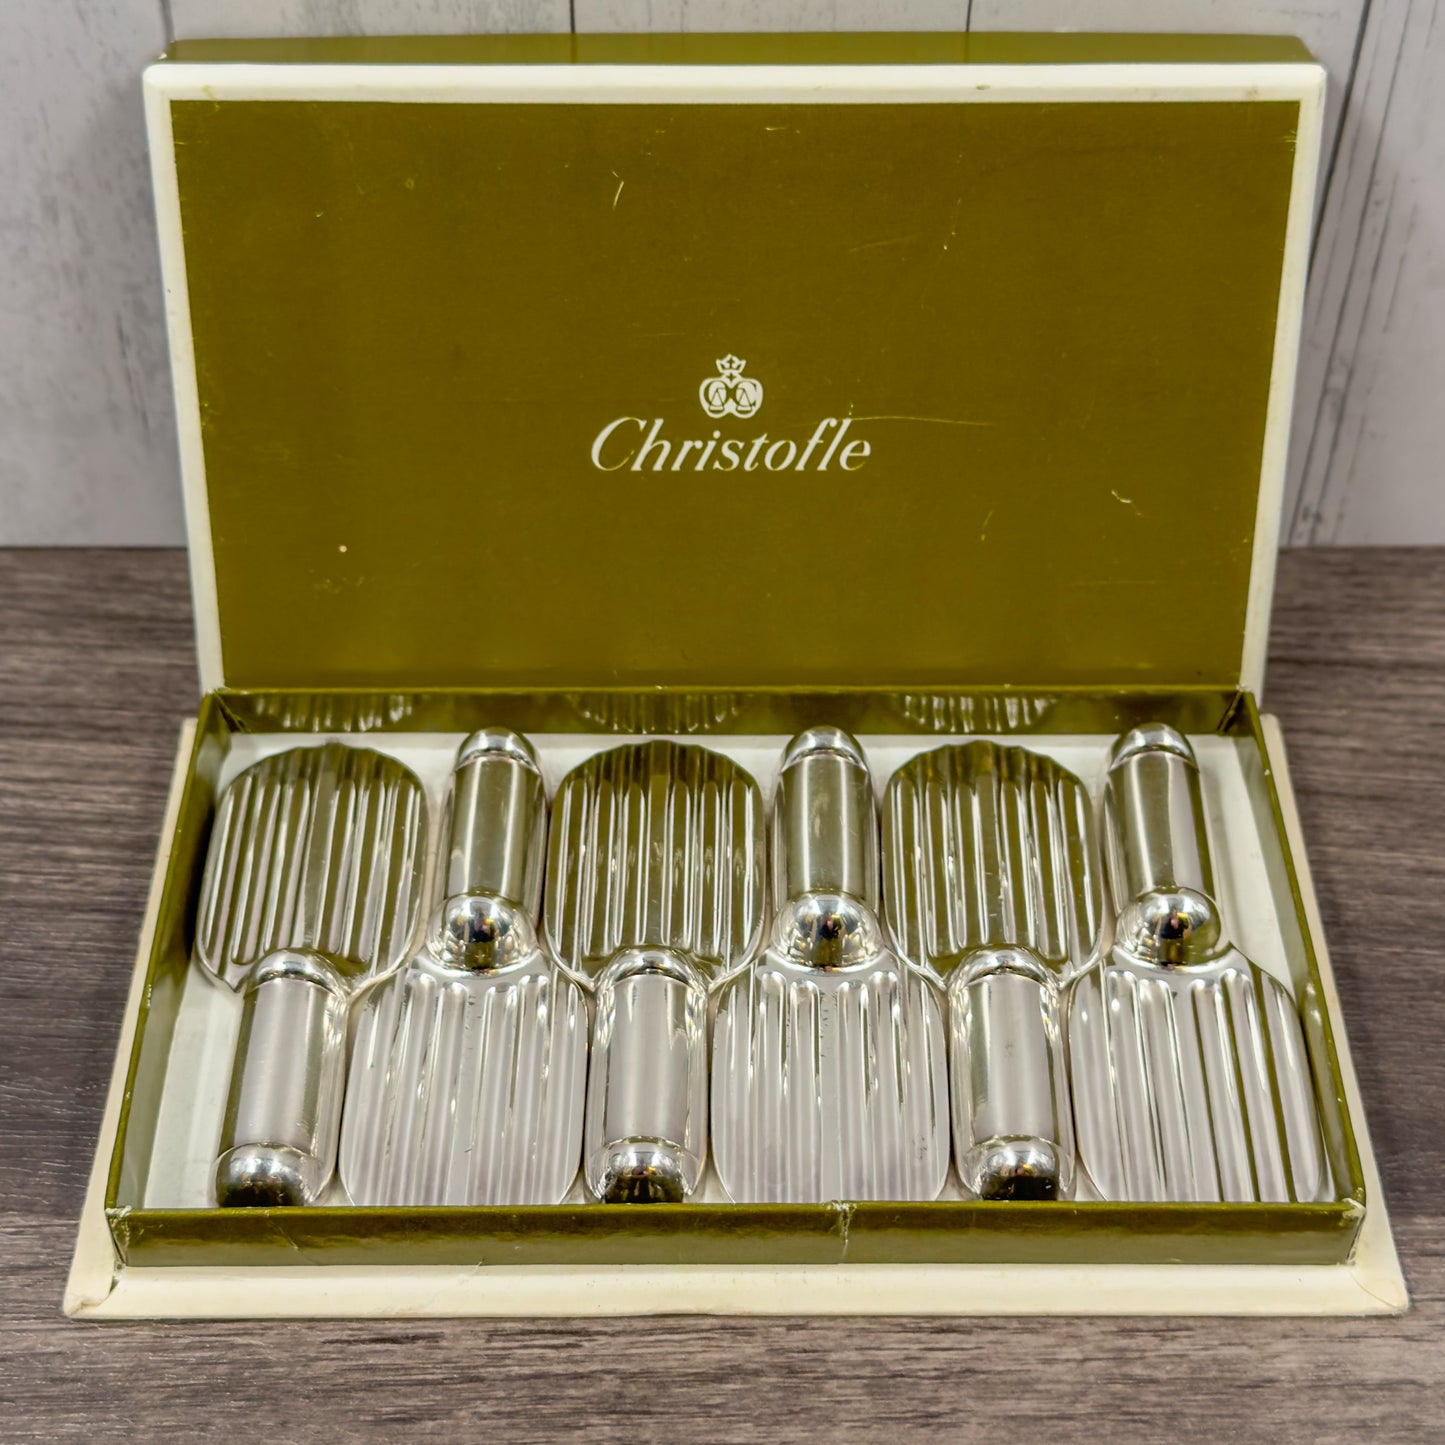 Rare Vintage Art Deco Set of Six Silver-Plated Christofle Chopstick Holders / Cutlery Rests - Tennis Racquets